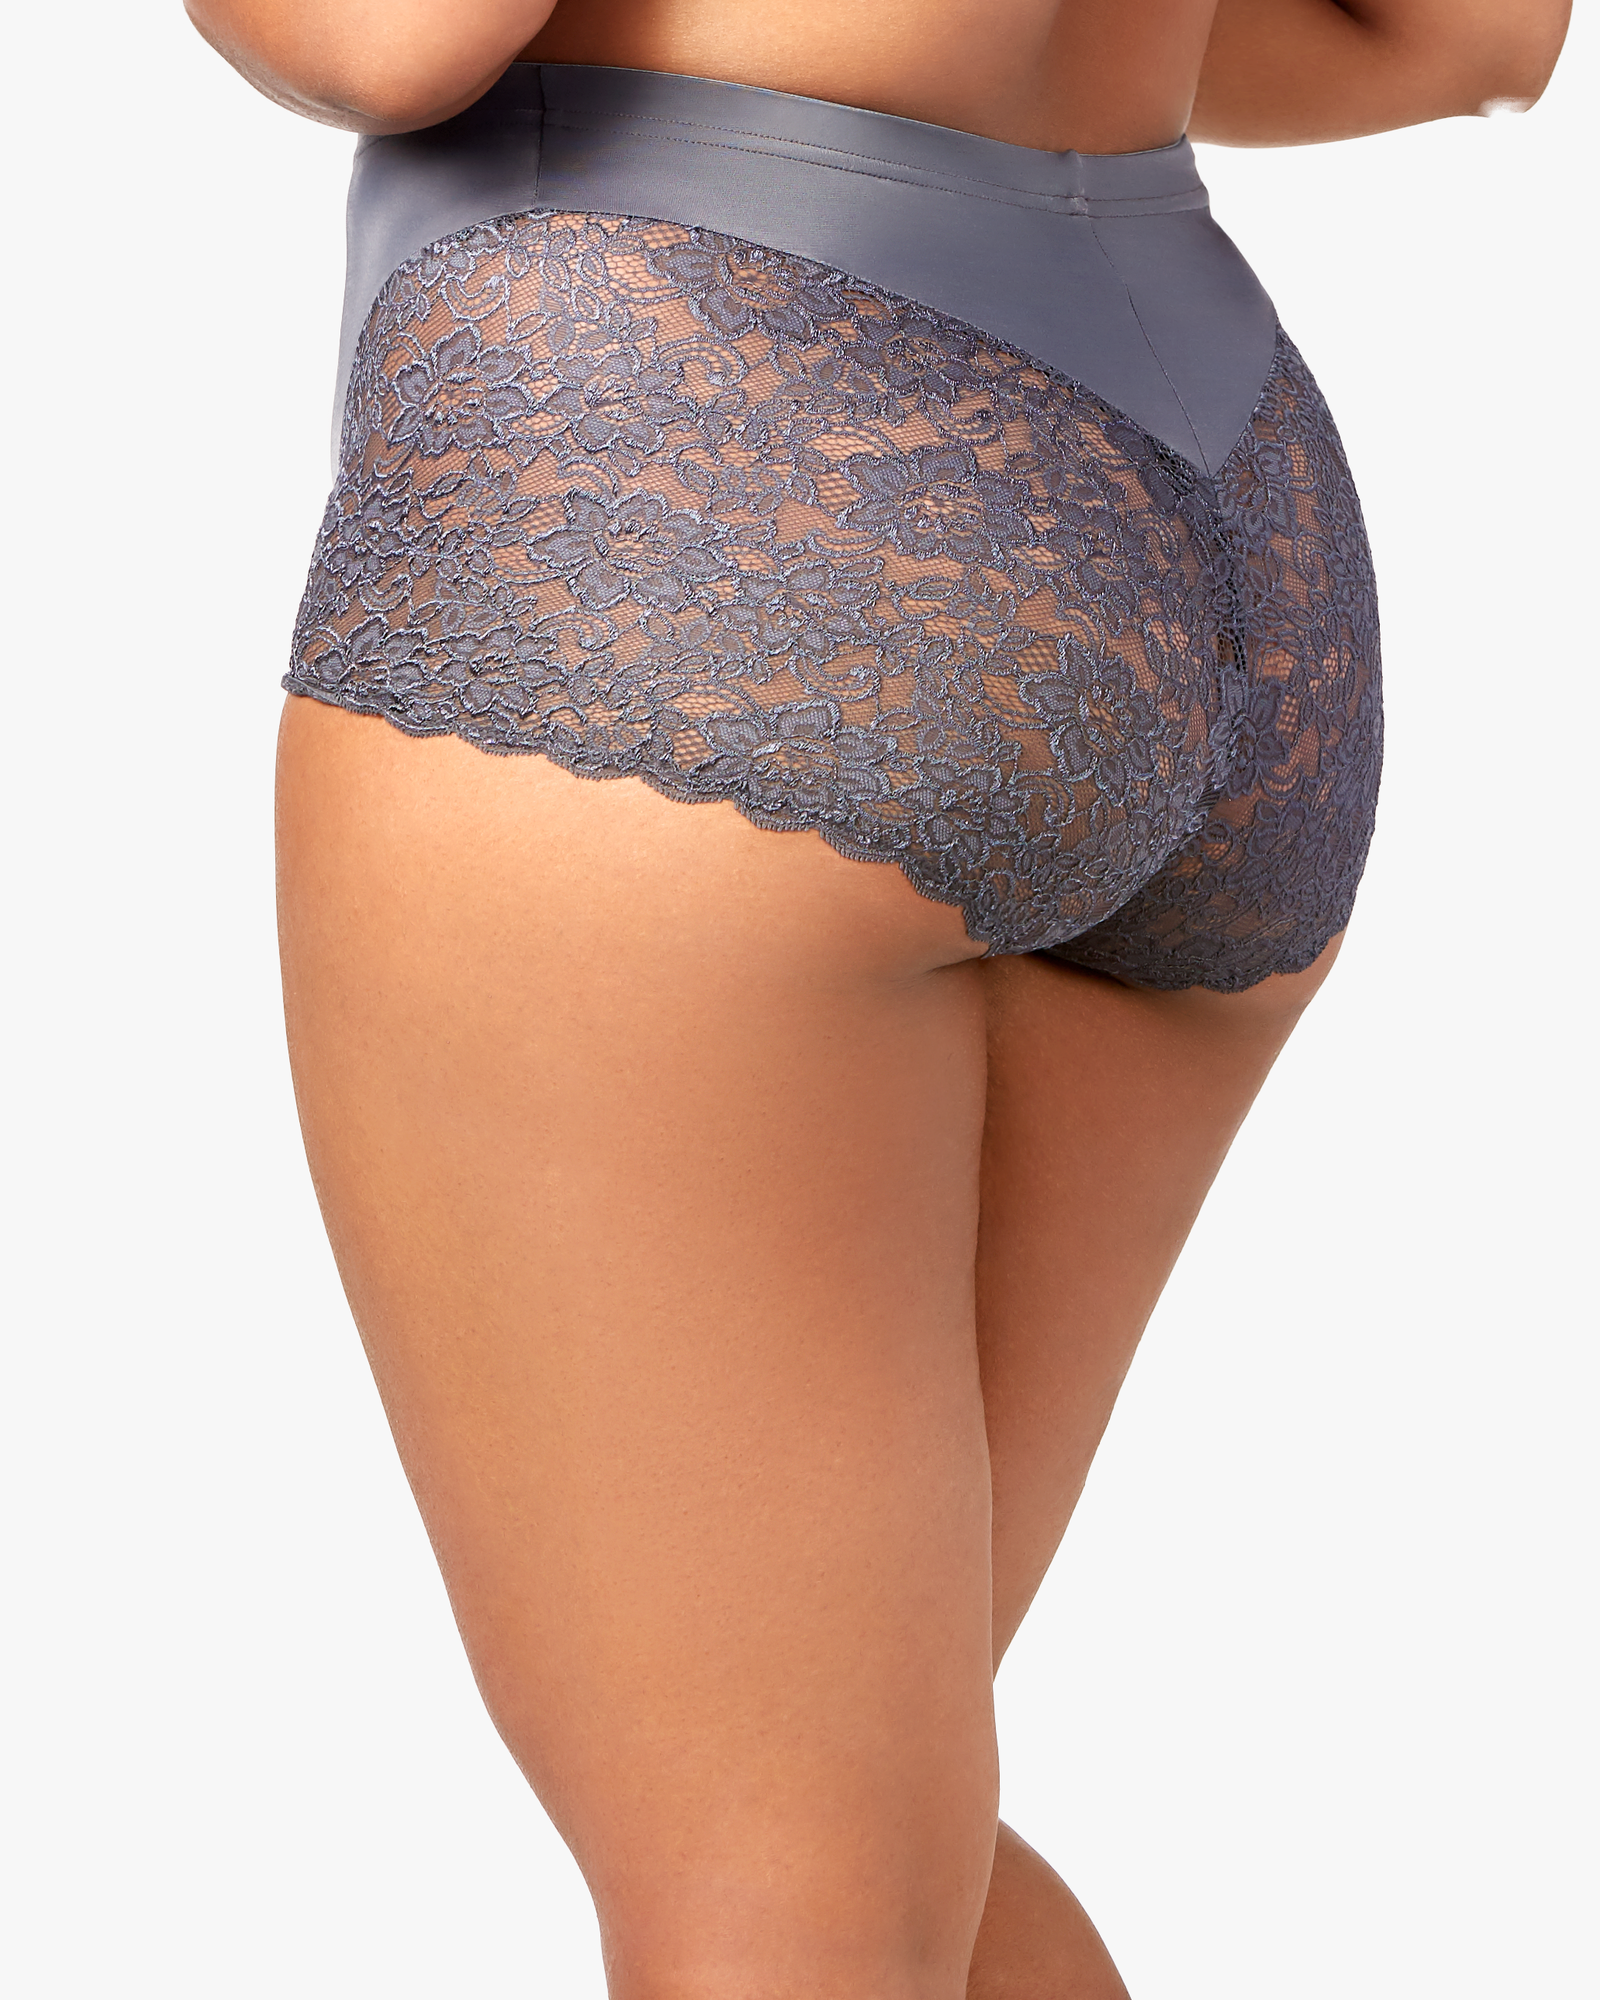 Stretch Lace Cheeky Panty